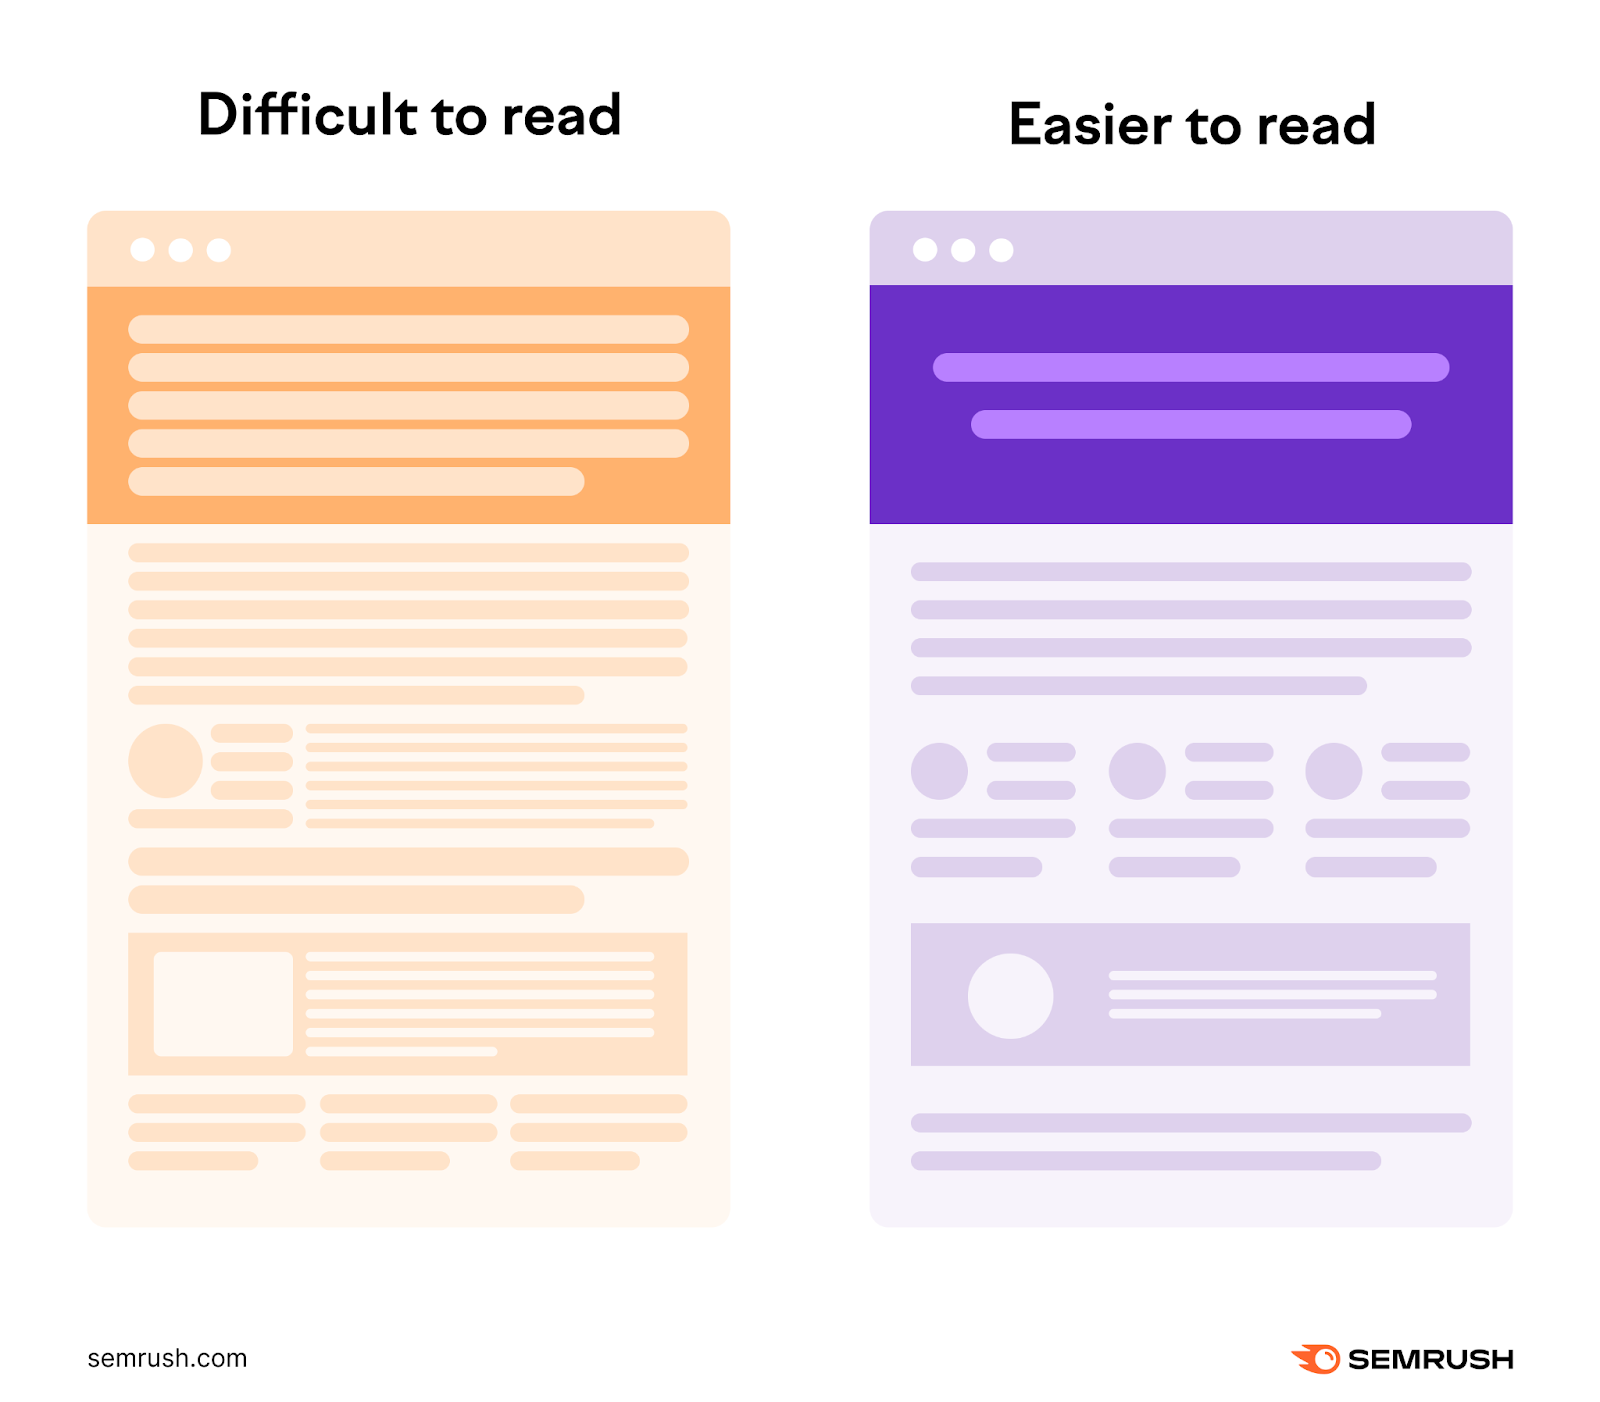 An infographic showing two email templates: difficult to read (left) and easier to read (right)